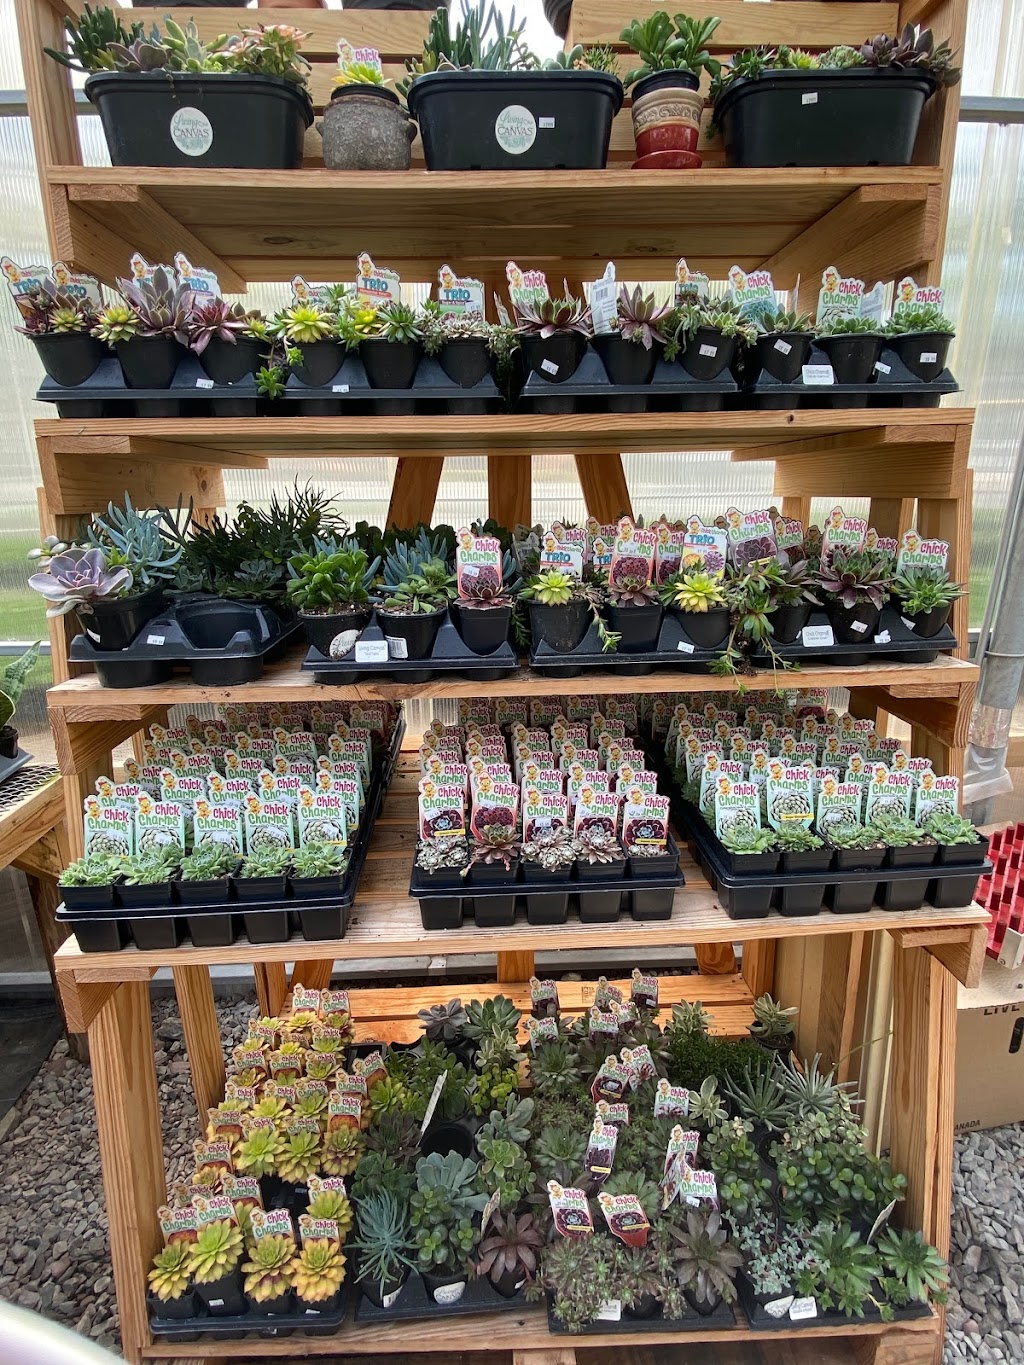 Countryside Floral And Greenhouses | 129 Mt Cobb Hwy, Lake Ariel, PA 18436 | Phone: (570) 689-4438